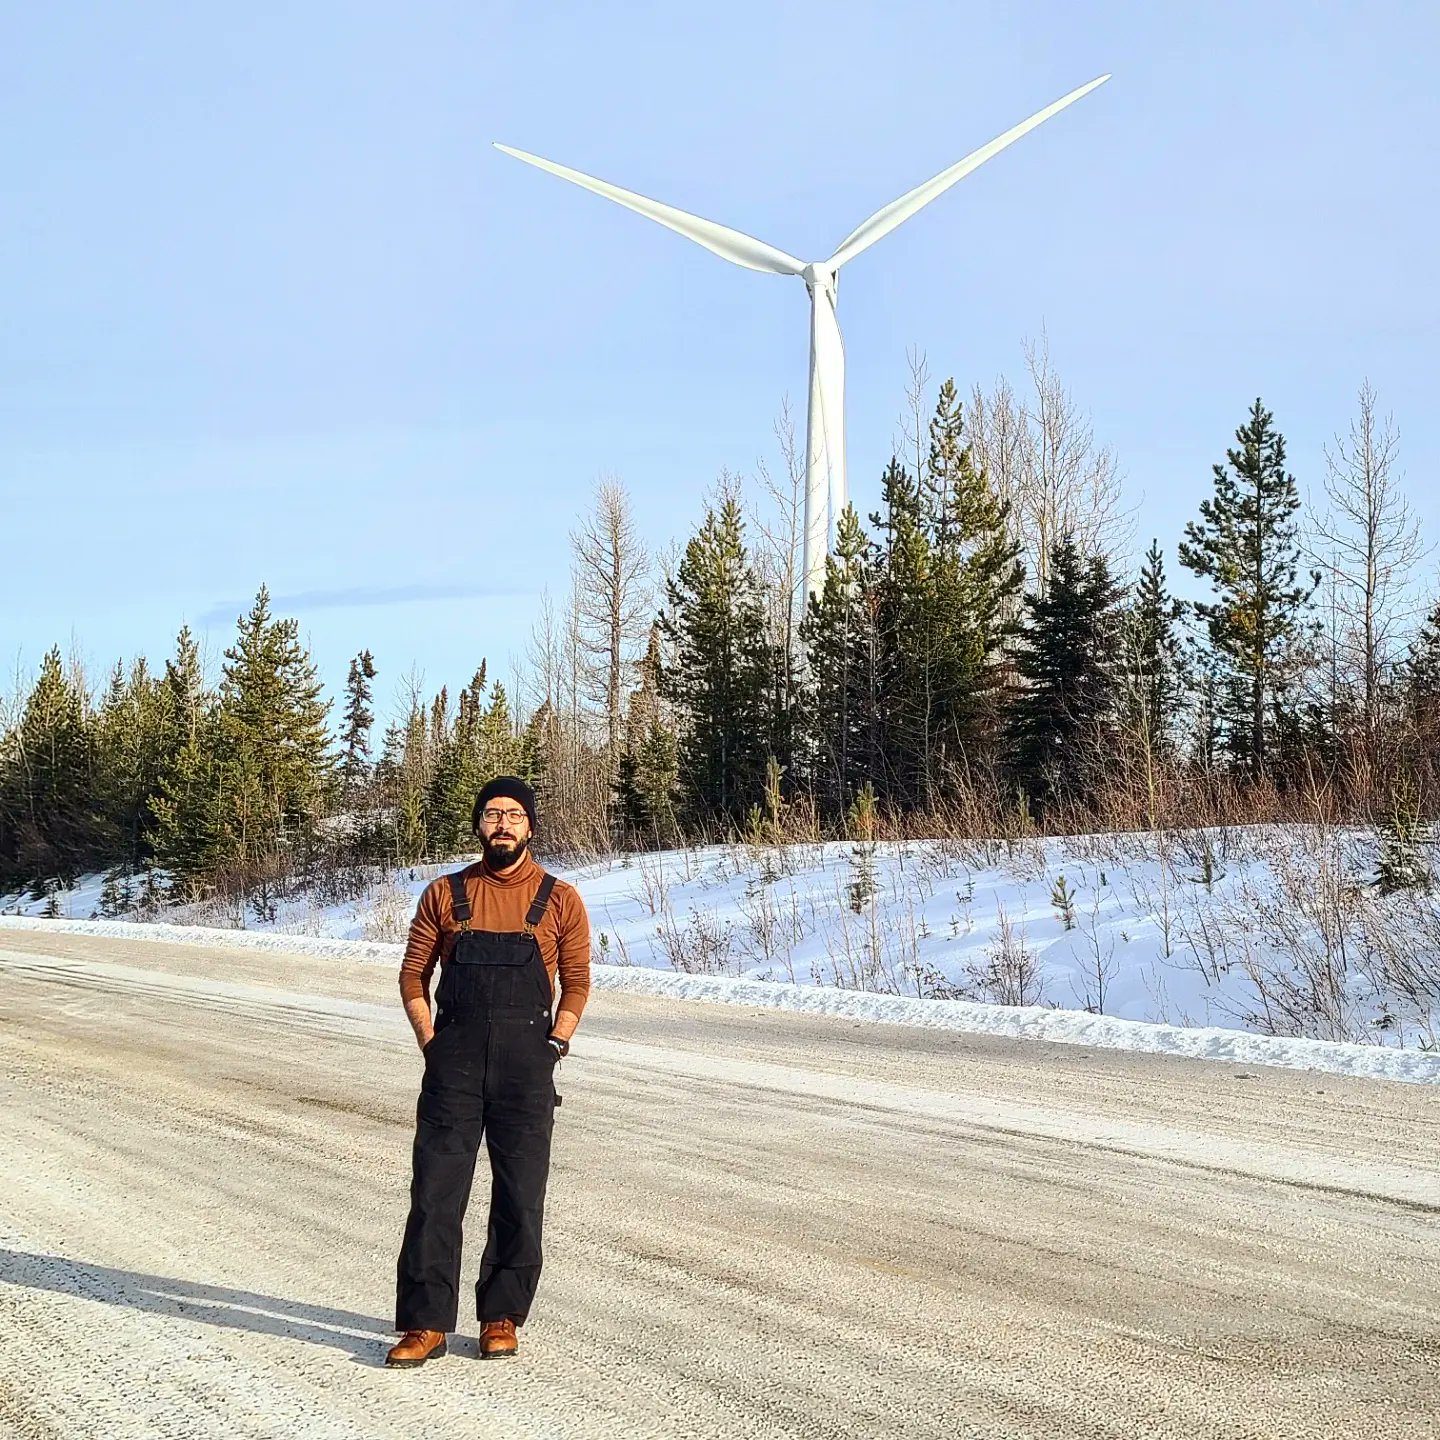 Hassan Al Kontar on Twitter: "Tumbler Ridge, a town surrounded by hills wind farms, 2 hours away from FSJ, less than 2000 people, and lovely smiling people.. Unfortunately I can't